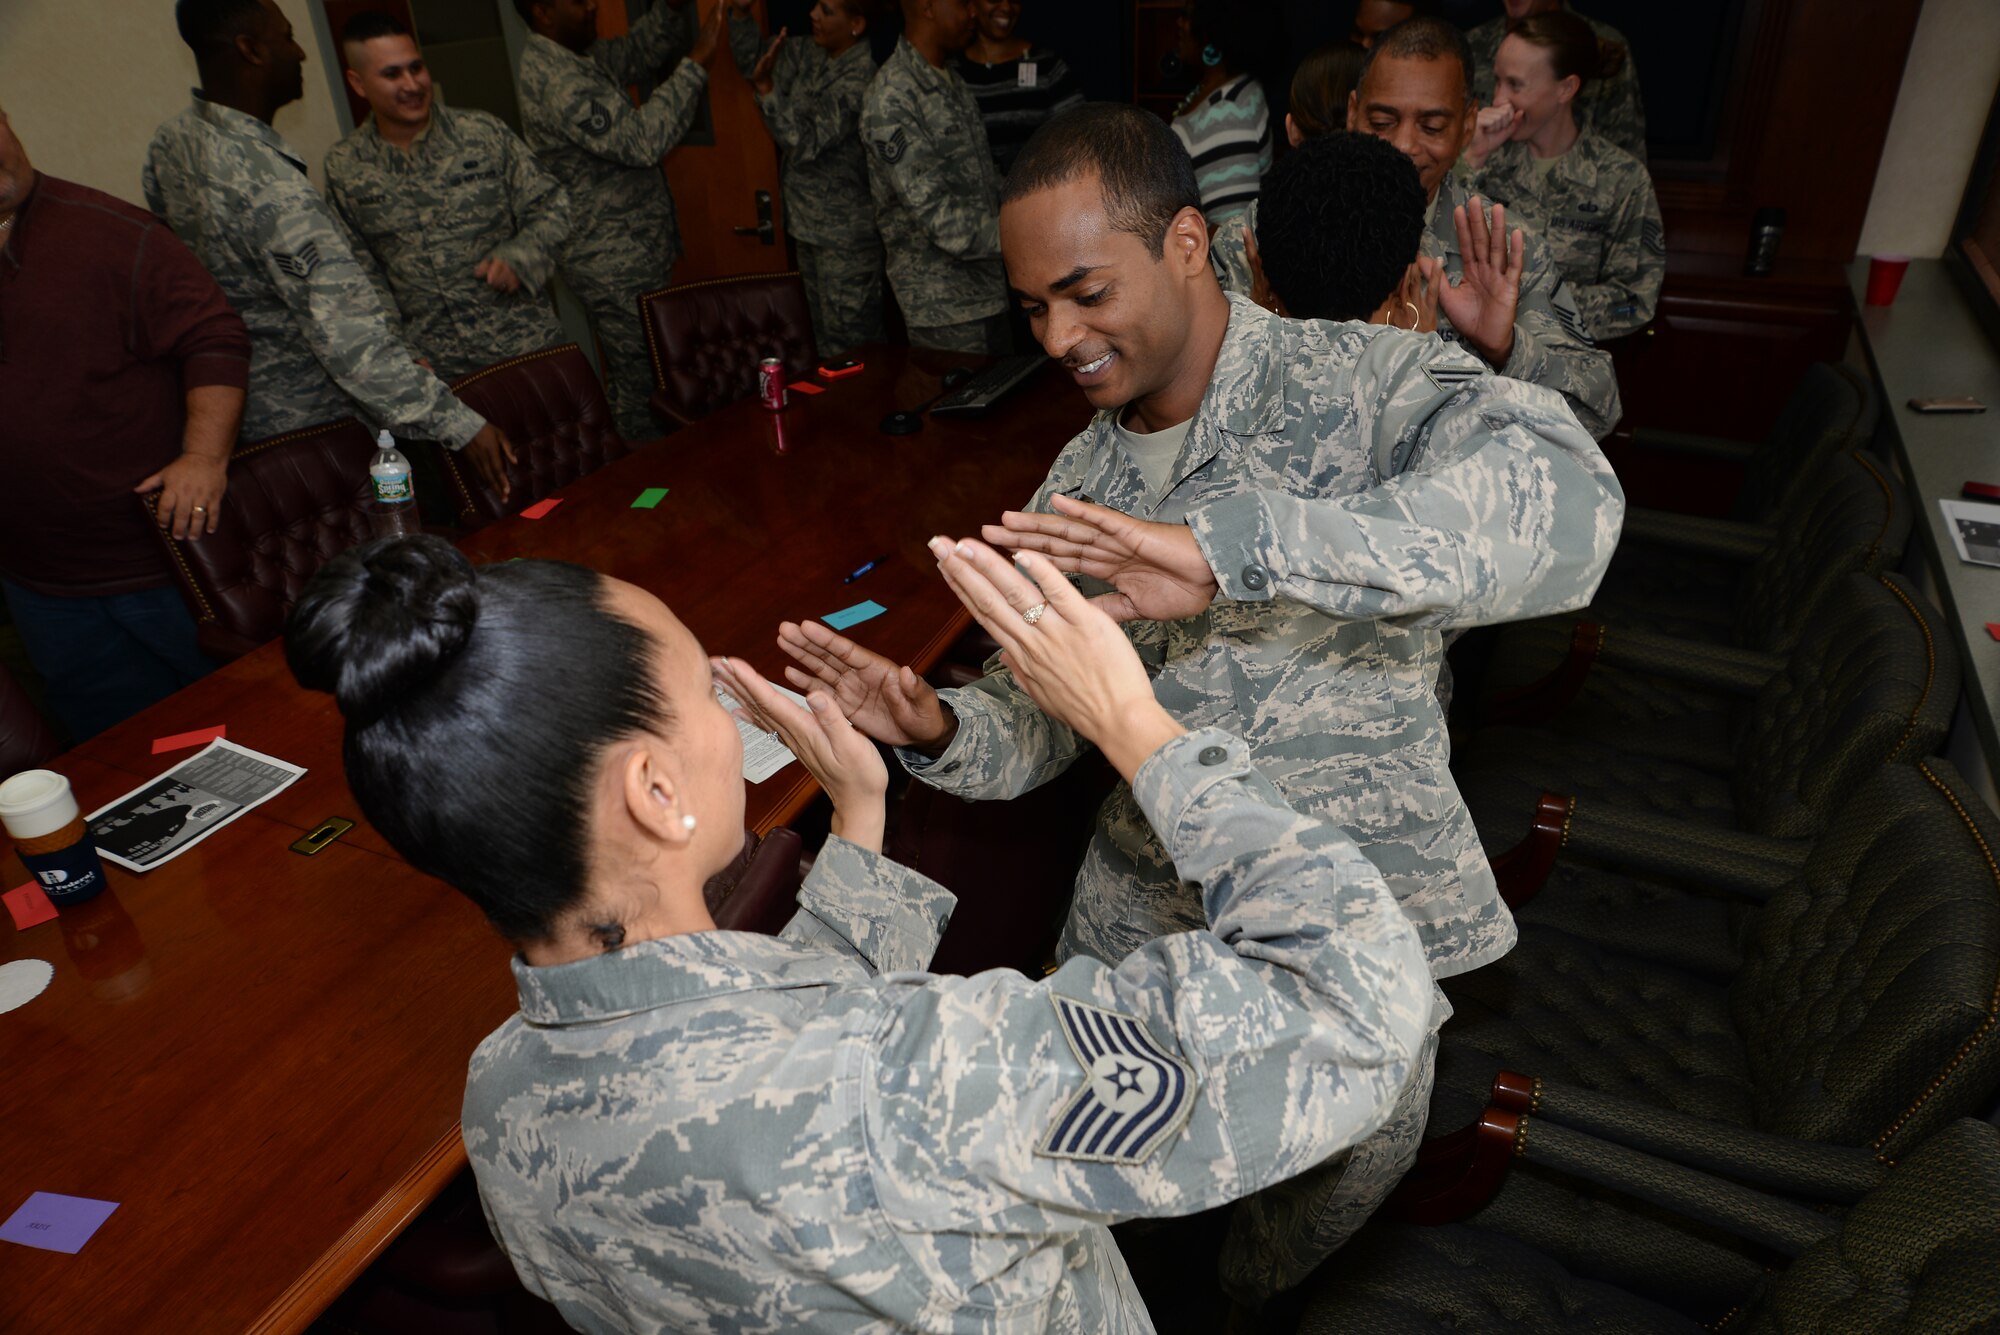 Tech. Sgt. Angela Morales, NCO in charge of the commander’s support staff, and Senior Airman Hasan Davis, departures specialist, mirror each other’s movements as part of a stress management exercise during Air Force Mortuary Affairs Operations Wingman Day Oct. 23, 2014. AFMAO’s Wingman Day focused on diversity and exploring the differences among Airmen. (U.S. Air Force photo/Master Sgt. Christopher Gish)